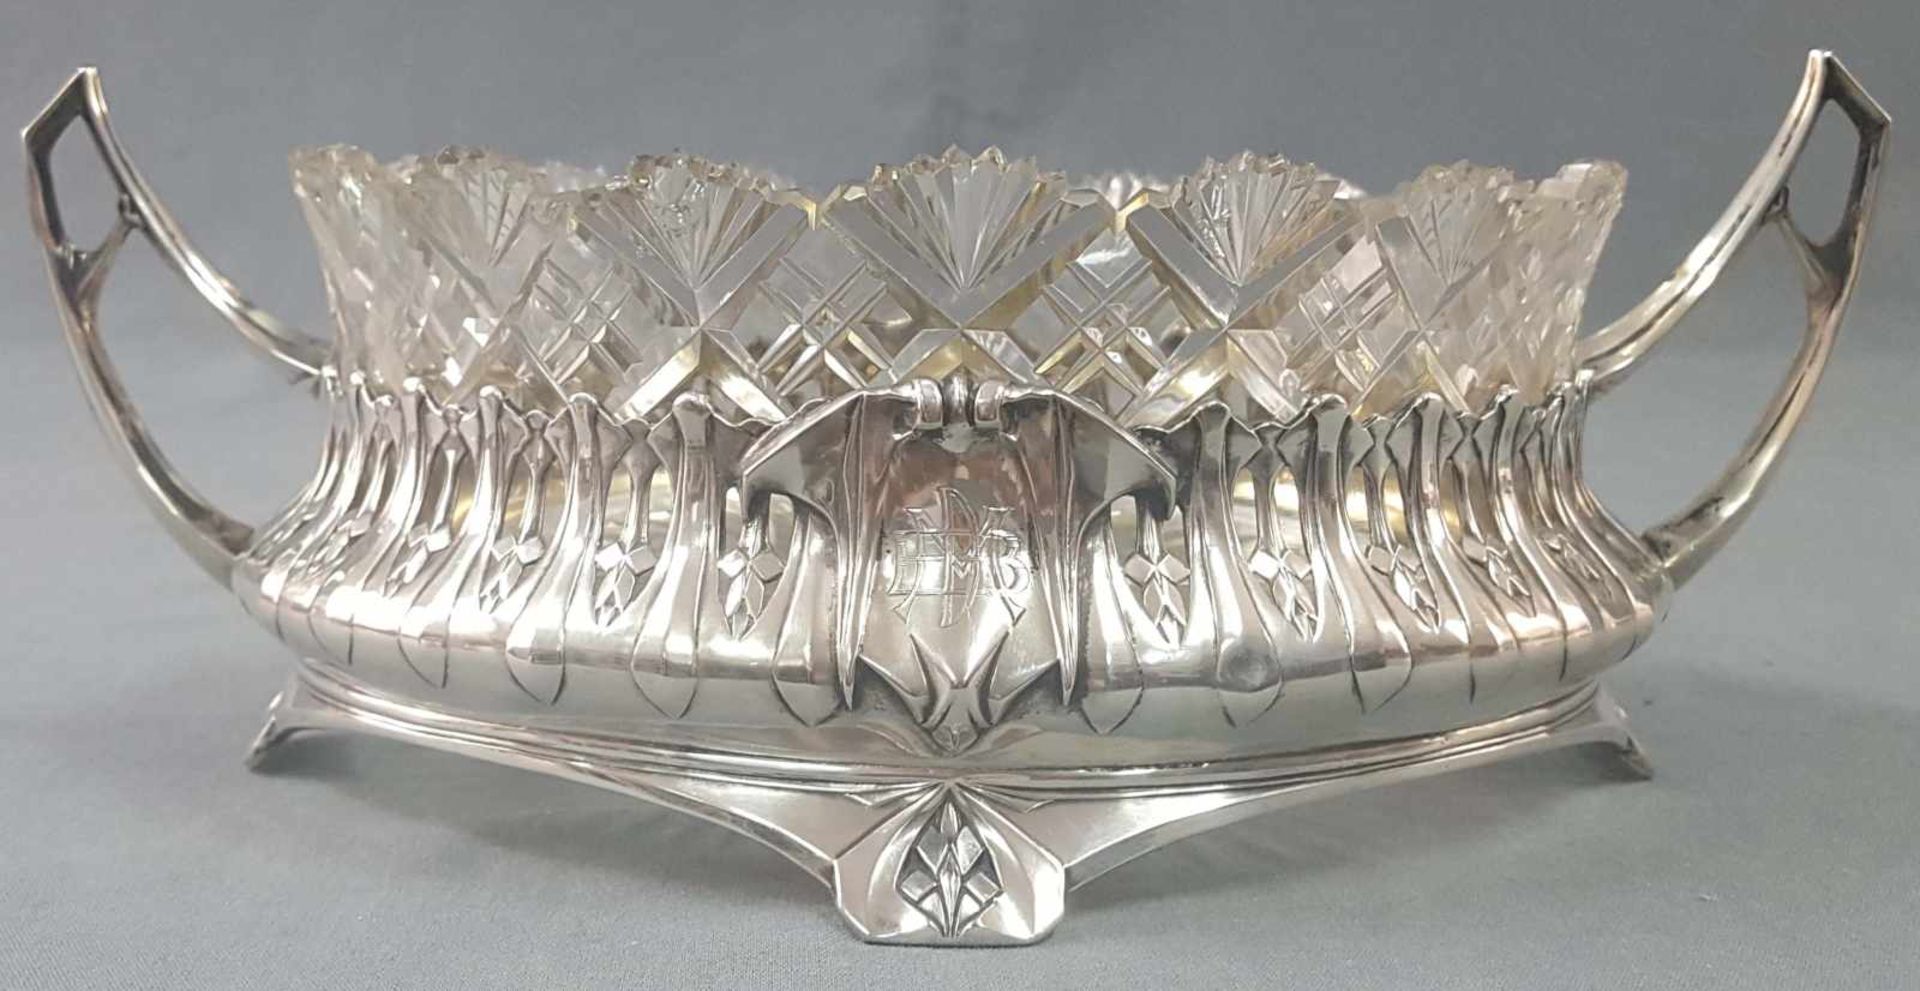 Jardiniere. Silver with original lead crystal glas insert. - Image 6 of 12